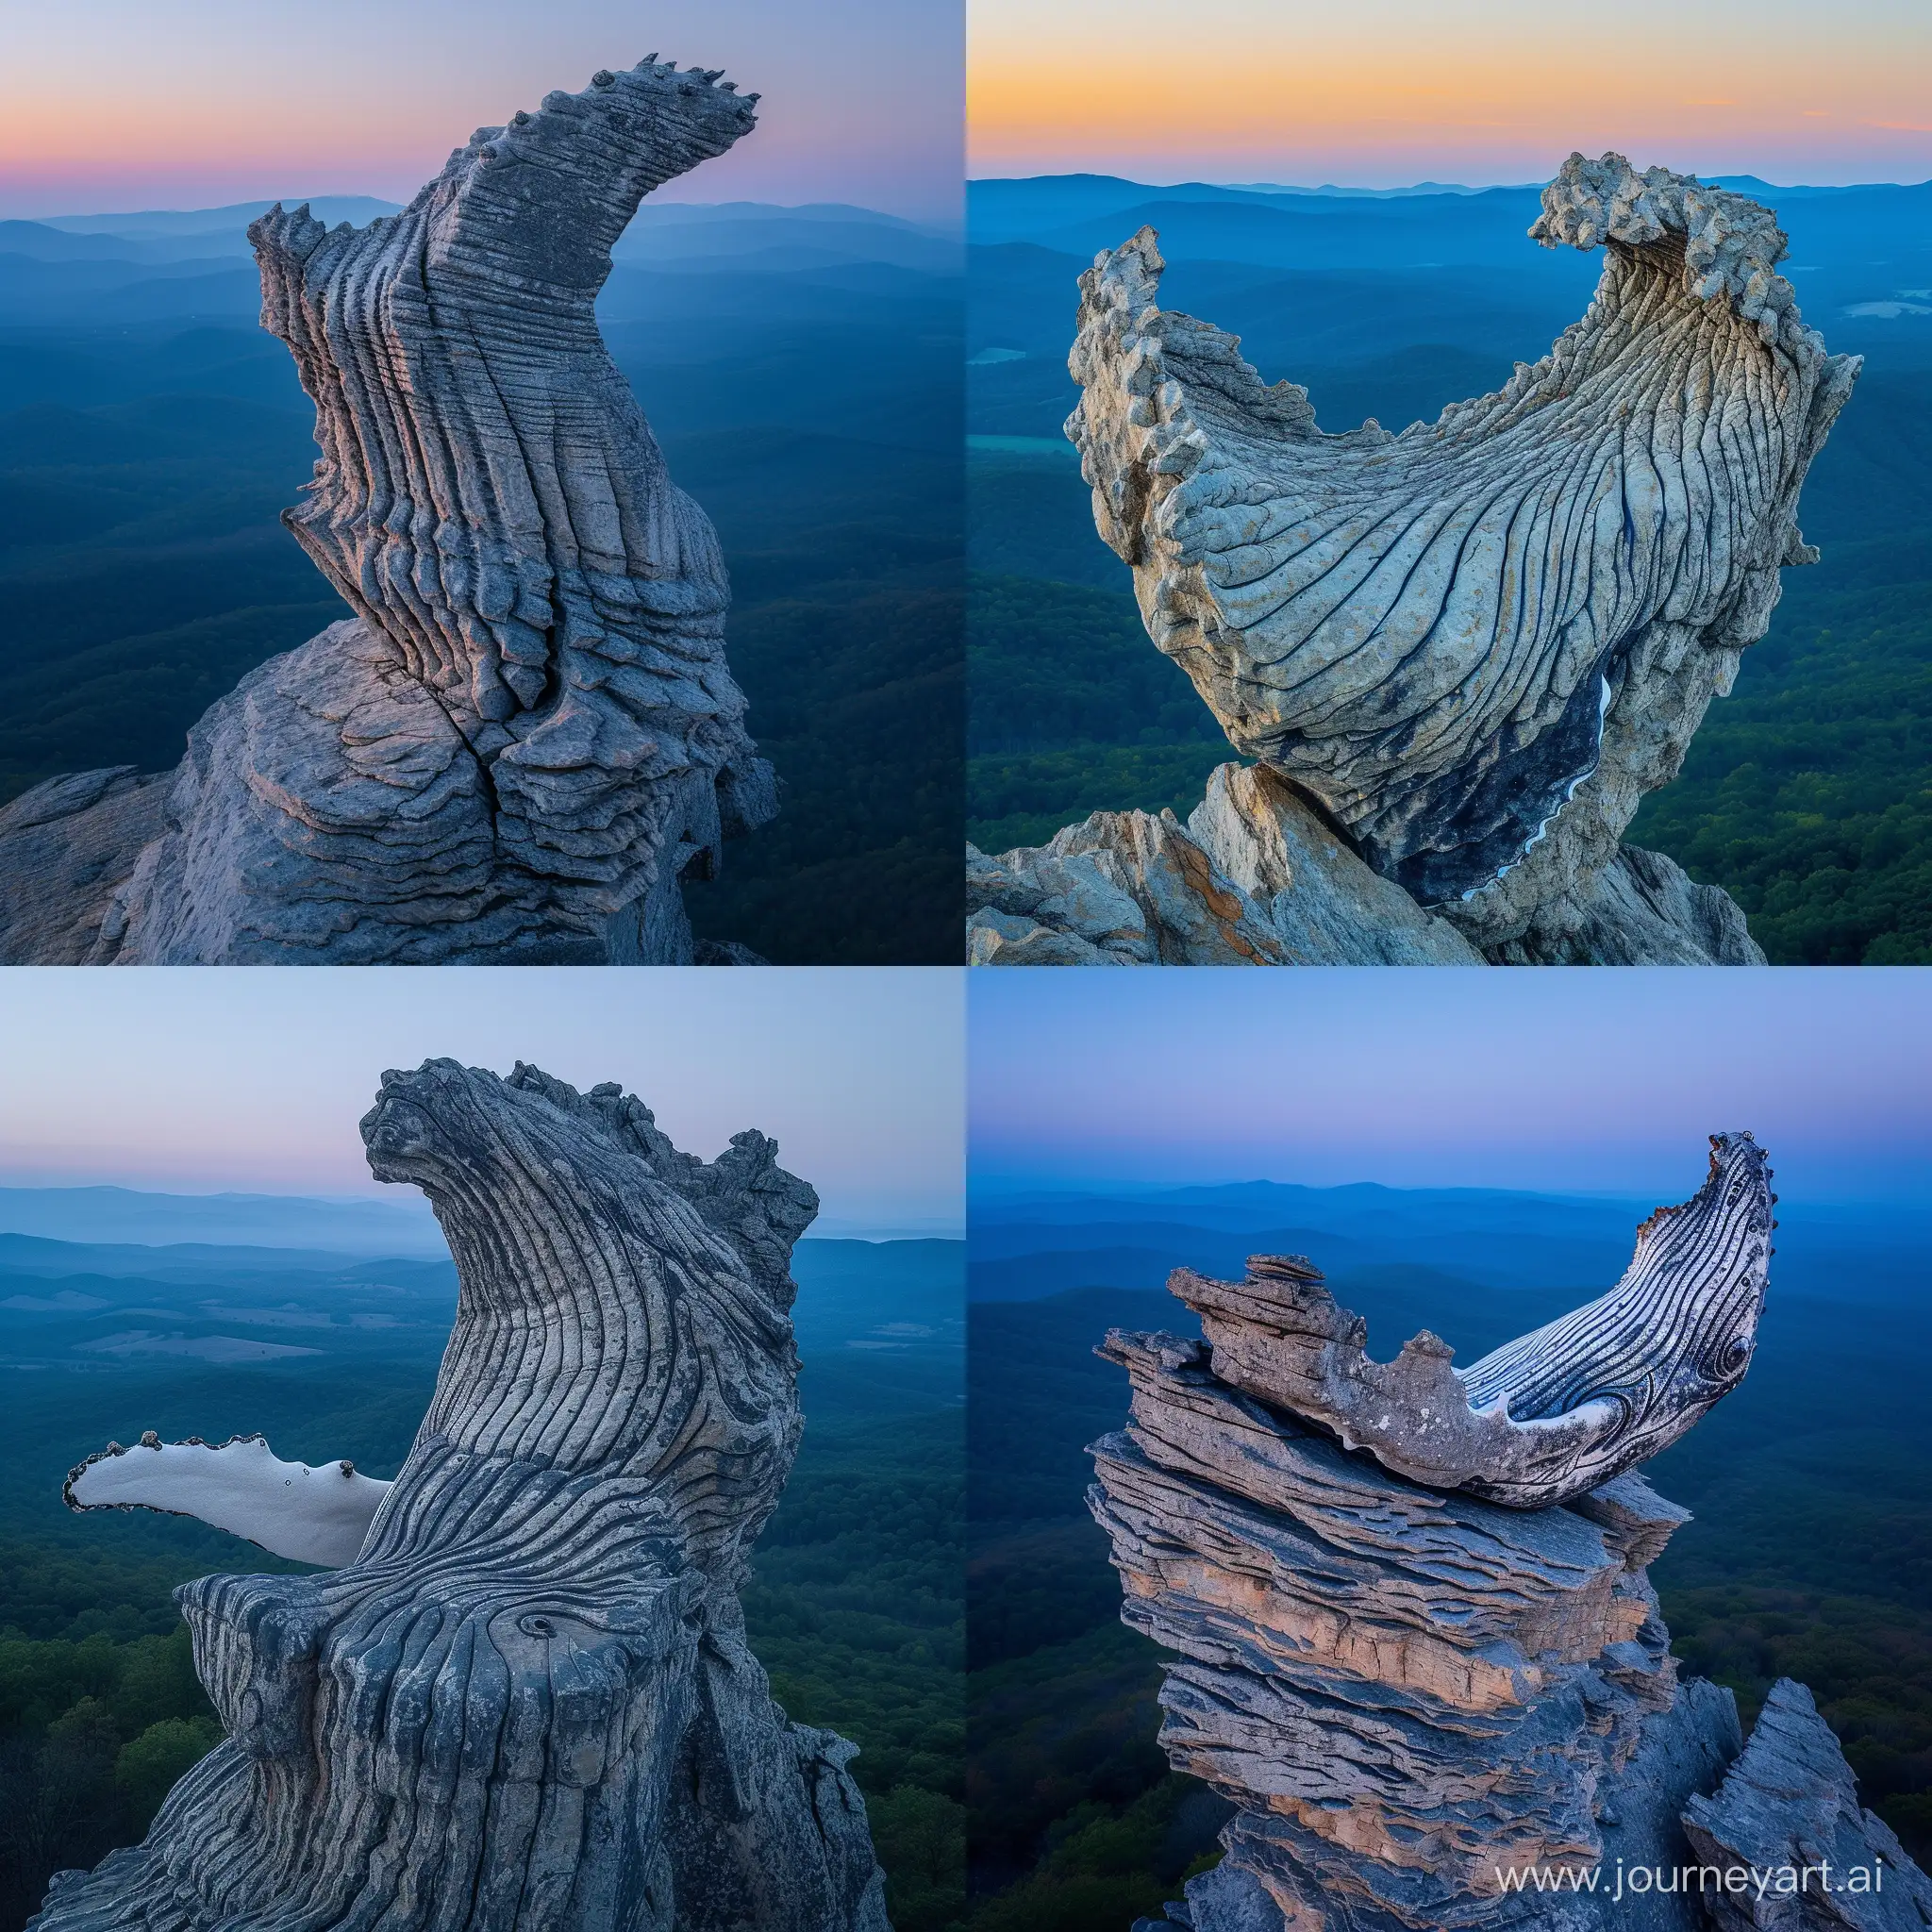 photo of humpback rock outcrop, outcrop is in the shape of a breaching humpback whale, looks exactly like a humpback whale, outline of a humpback whale, head shape and fin shape clearly visible with striations on the ventral pleats, virginia, rolling blue ridge mountains in the background fading into deep blue, drone photography looking at the outcrop, morning, crisp, award winning landscape, sunrise, beautiful, gently lit by the sunrise